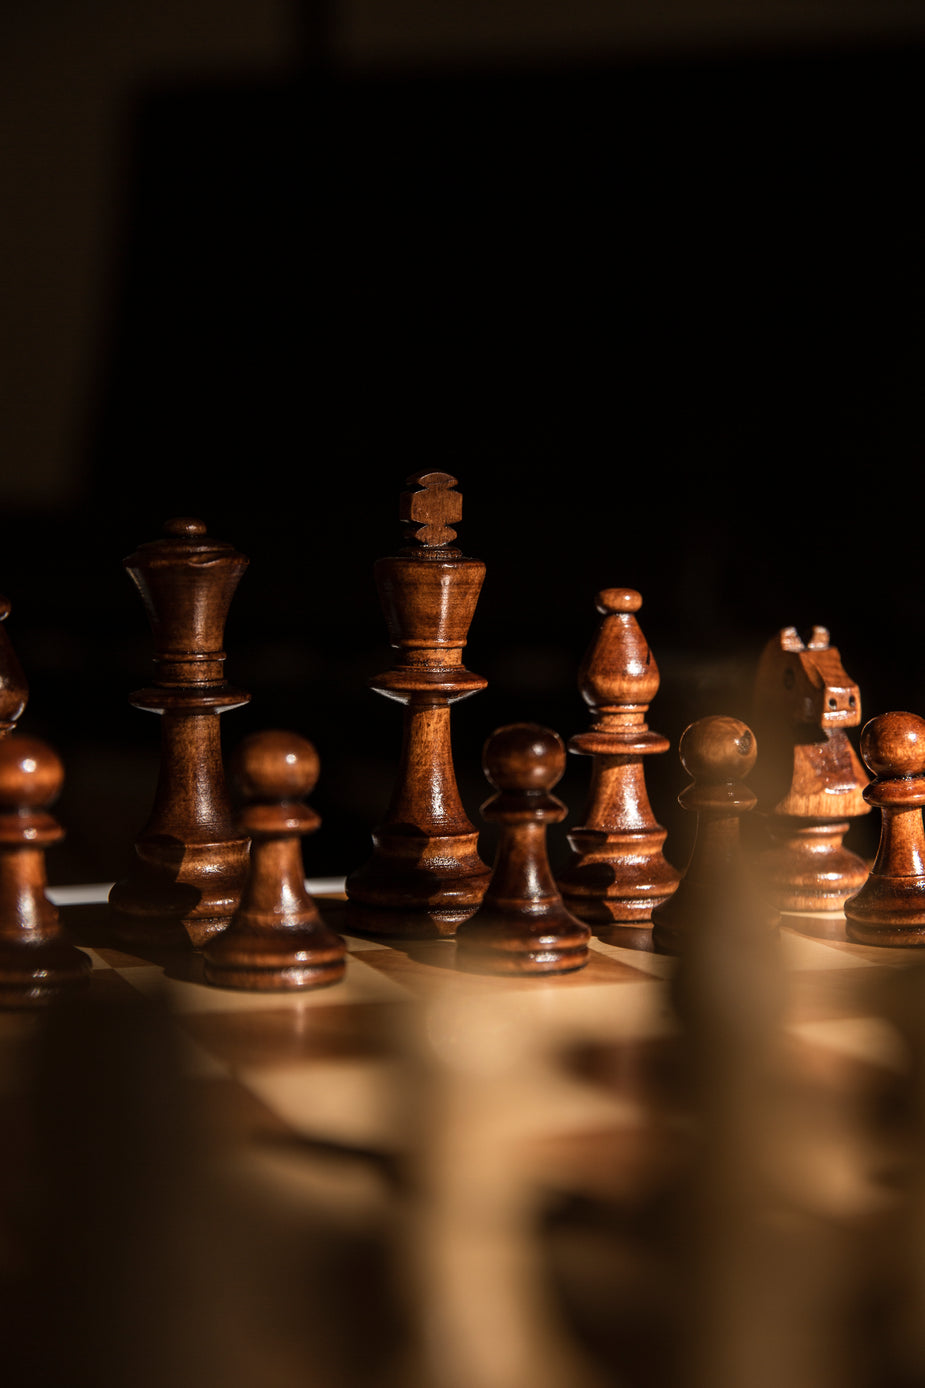 Chess HD Wallpapers and Backgrounds